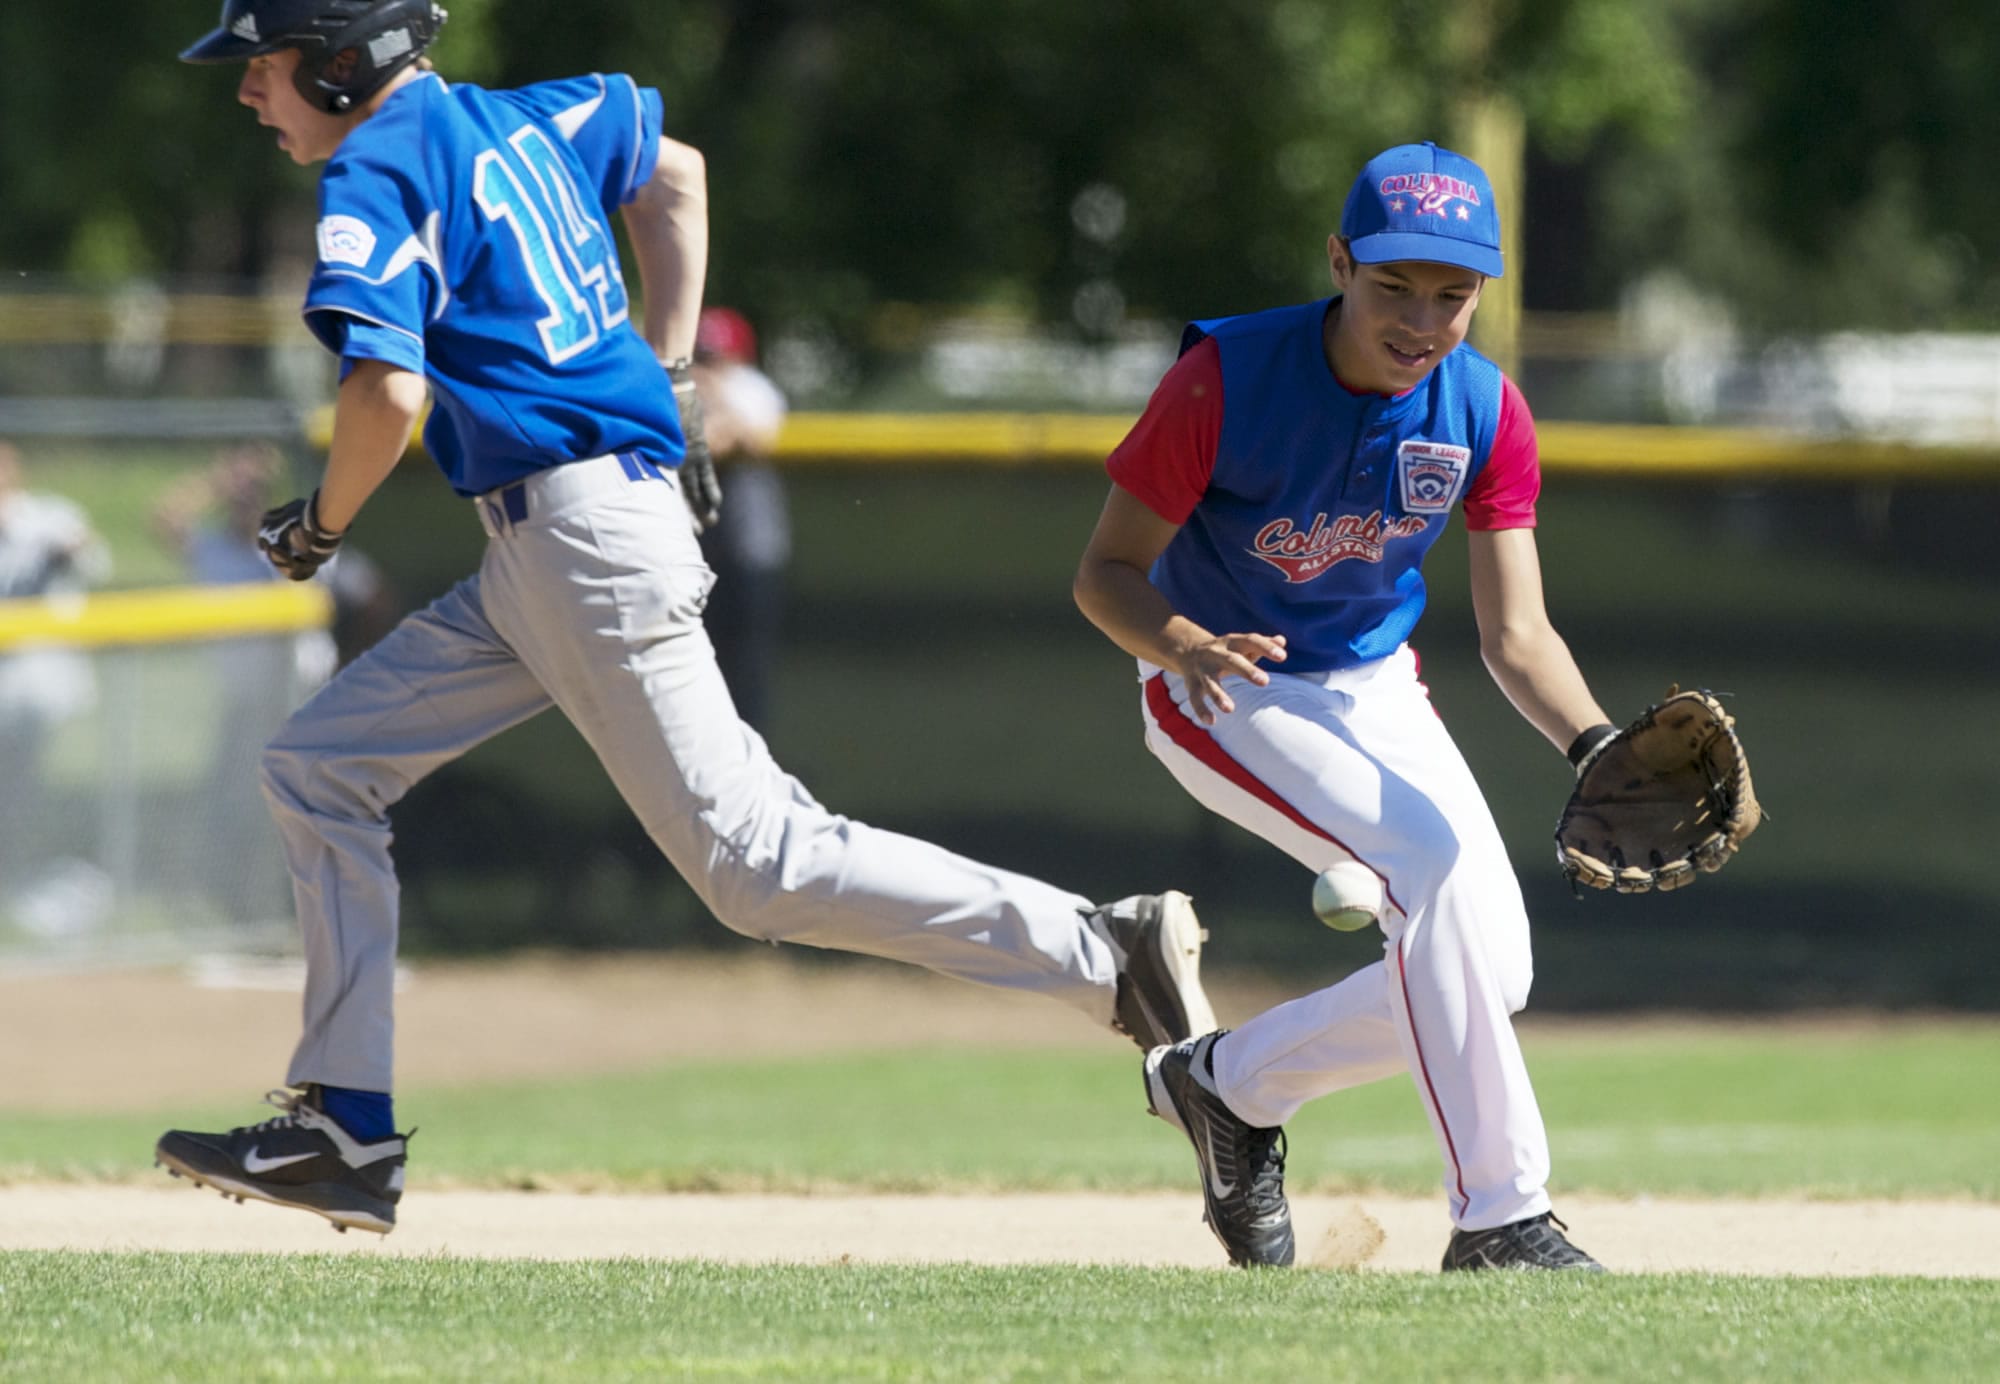 Columbia Little League's Jacob Olivarez fields a ball at third and makes the throw to first for the out against Manhattan Beach in the opening game of the Junior League Western Regional at Propstra Stadium on Tuesday.